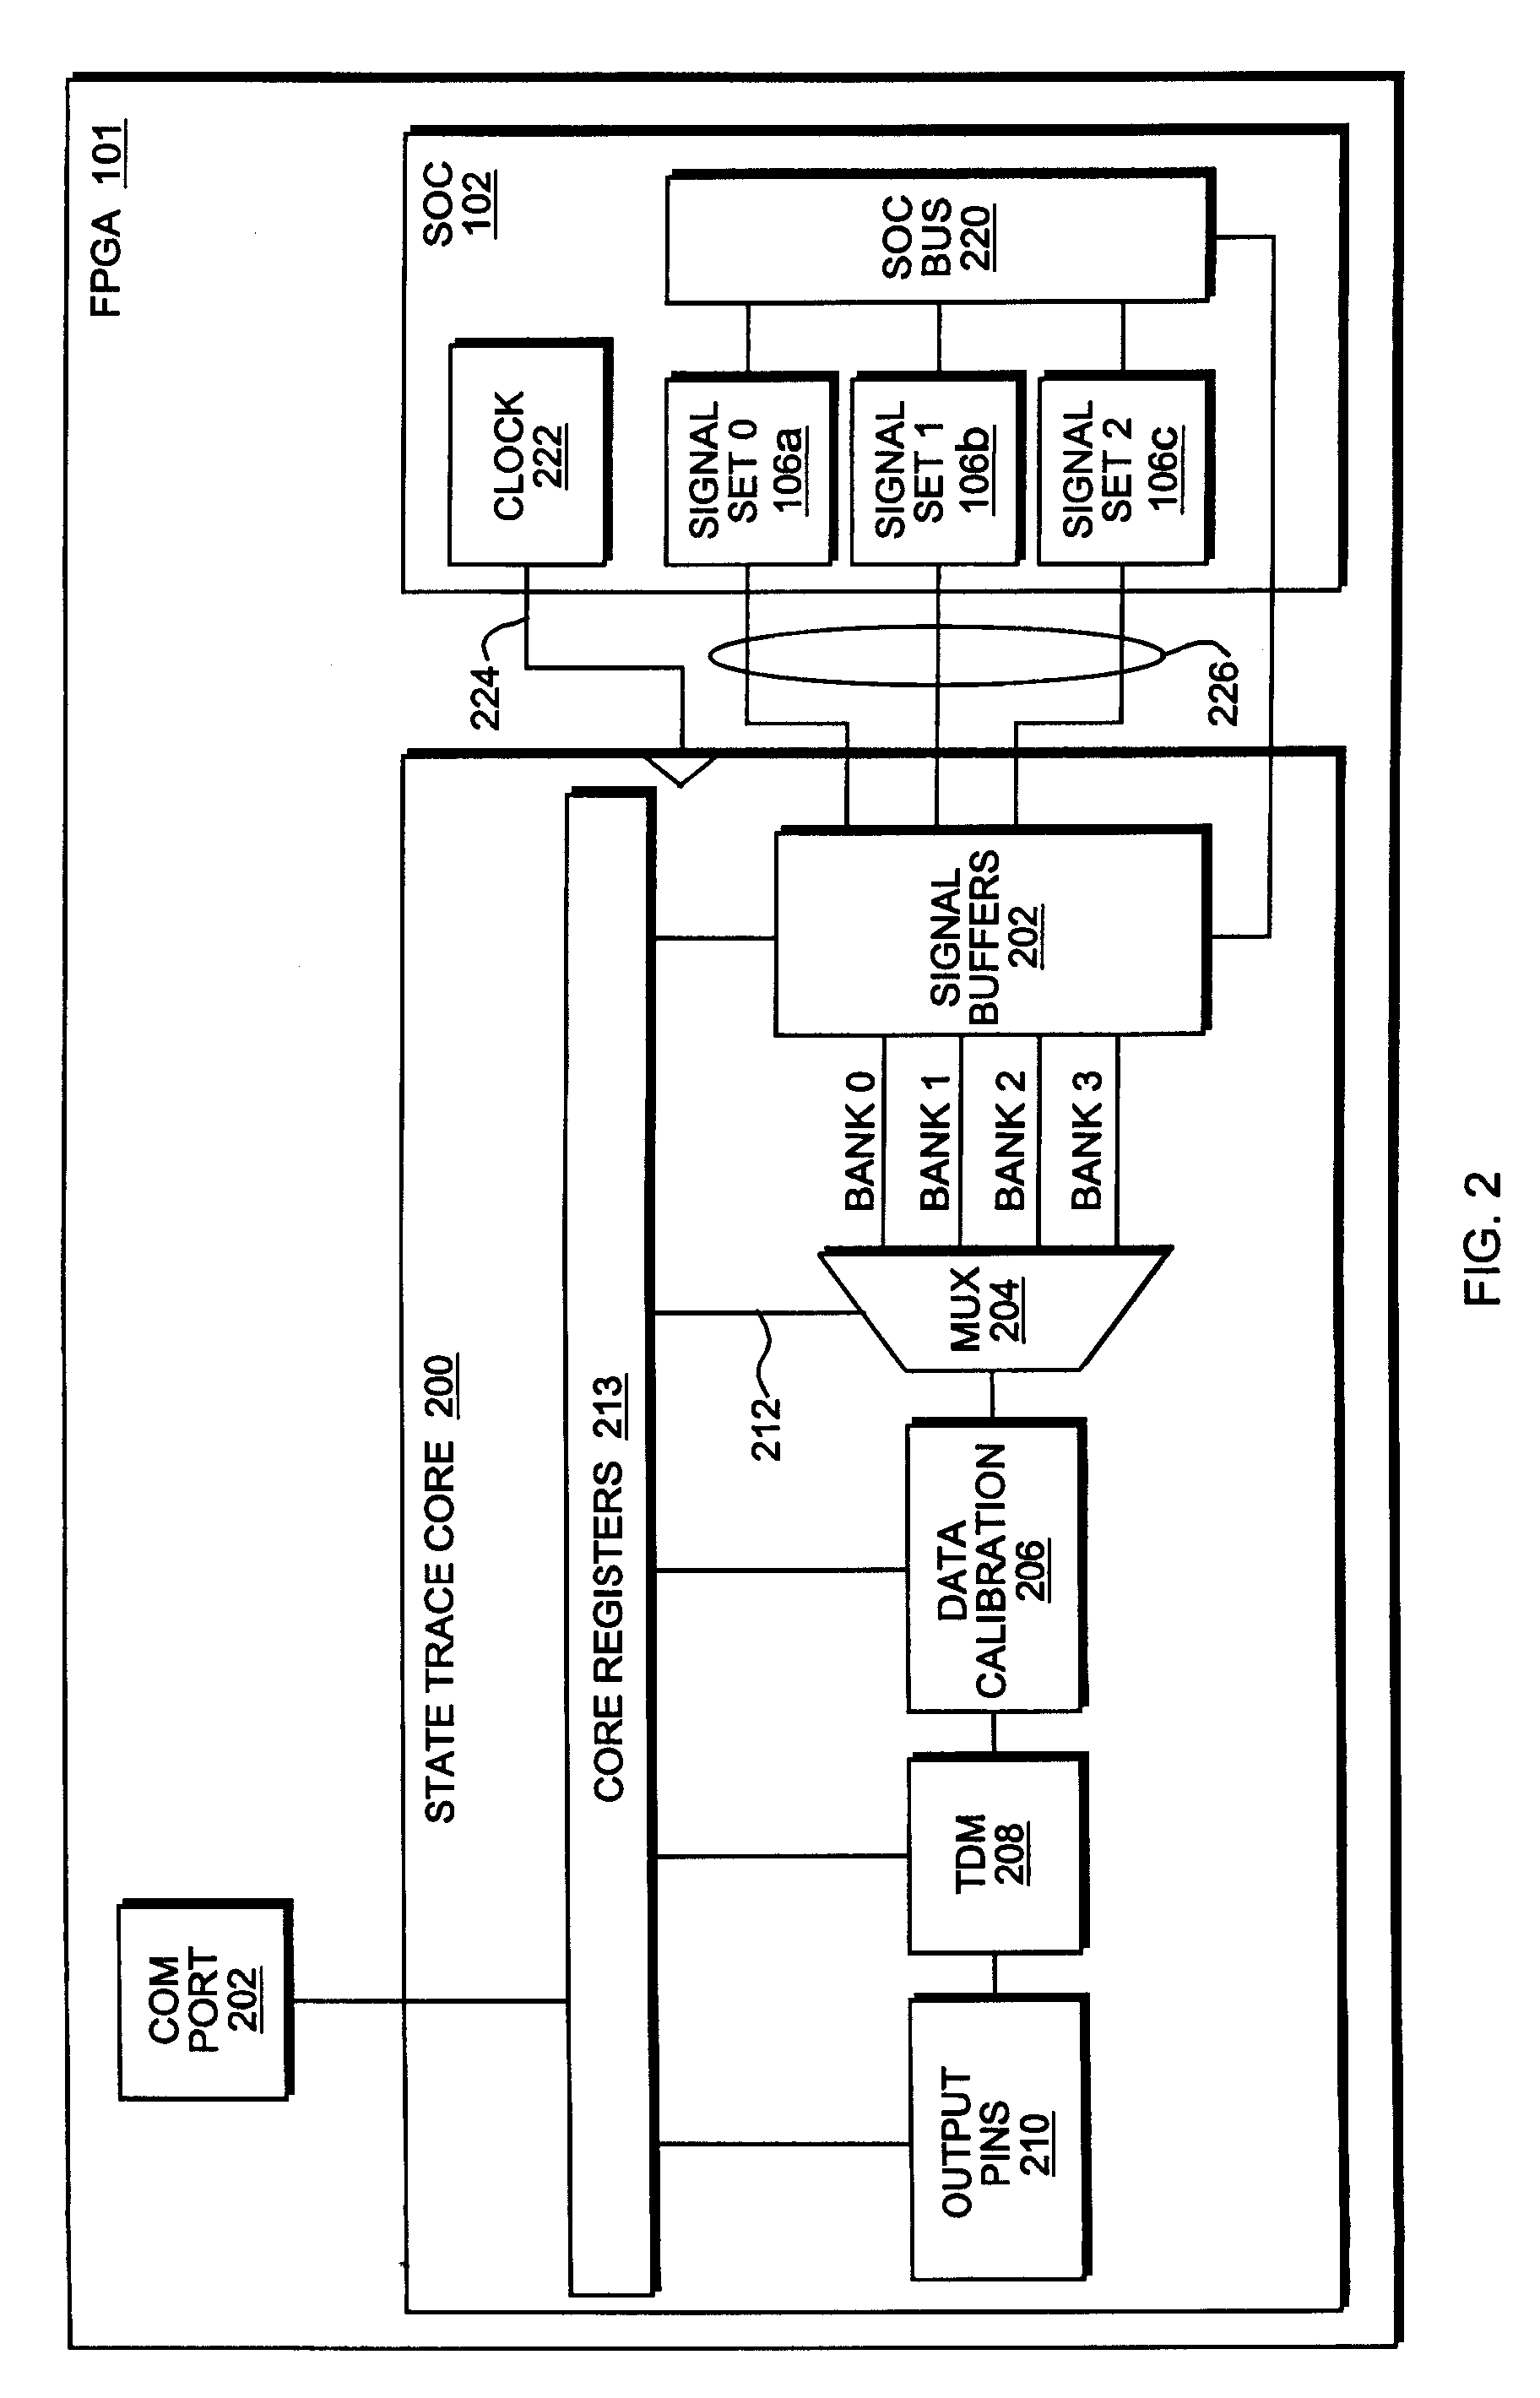 Apparatus and method for automated test setup